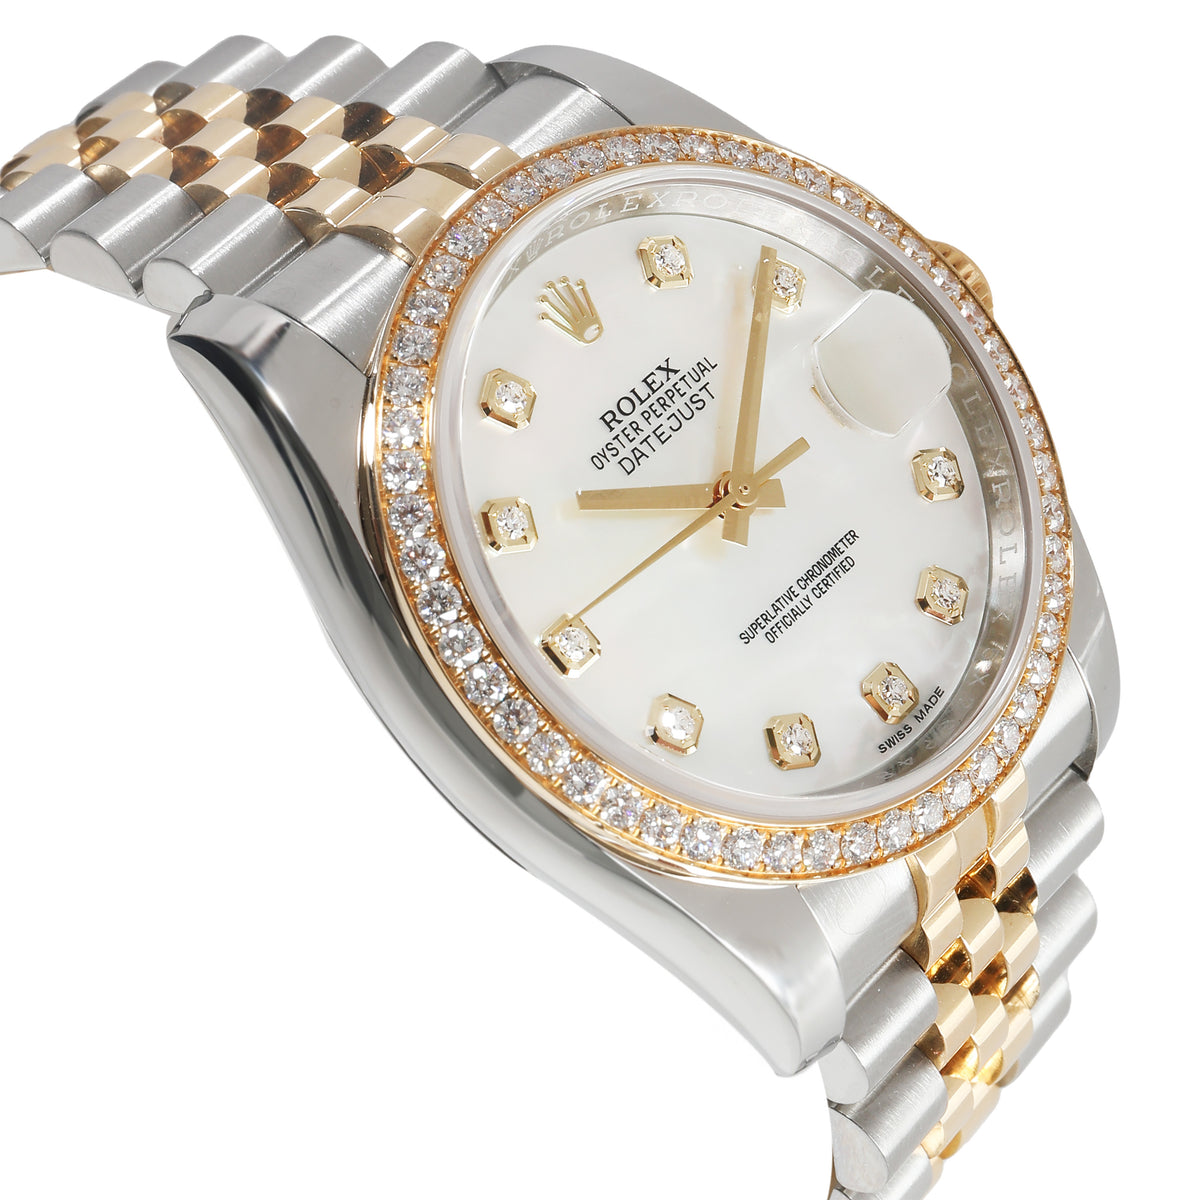 Datejust 116243 Unisex Watch in 18kt Stainless Steel/Yellow Gold